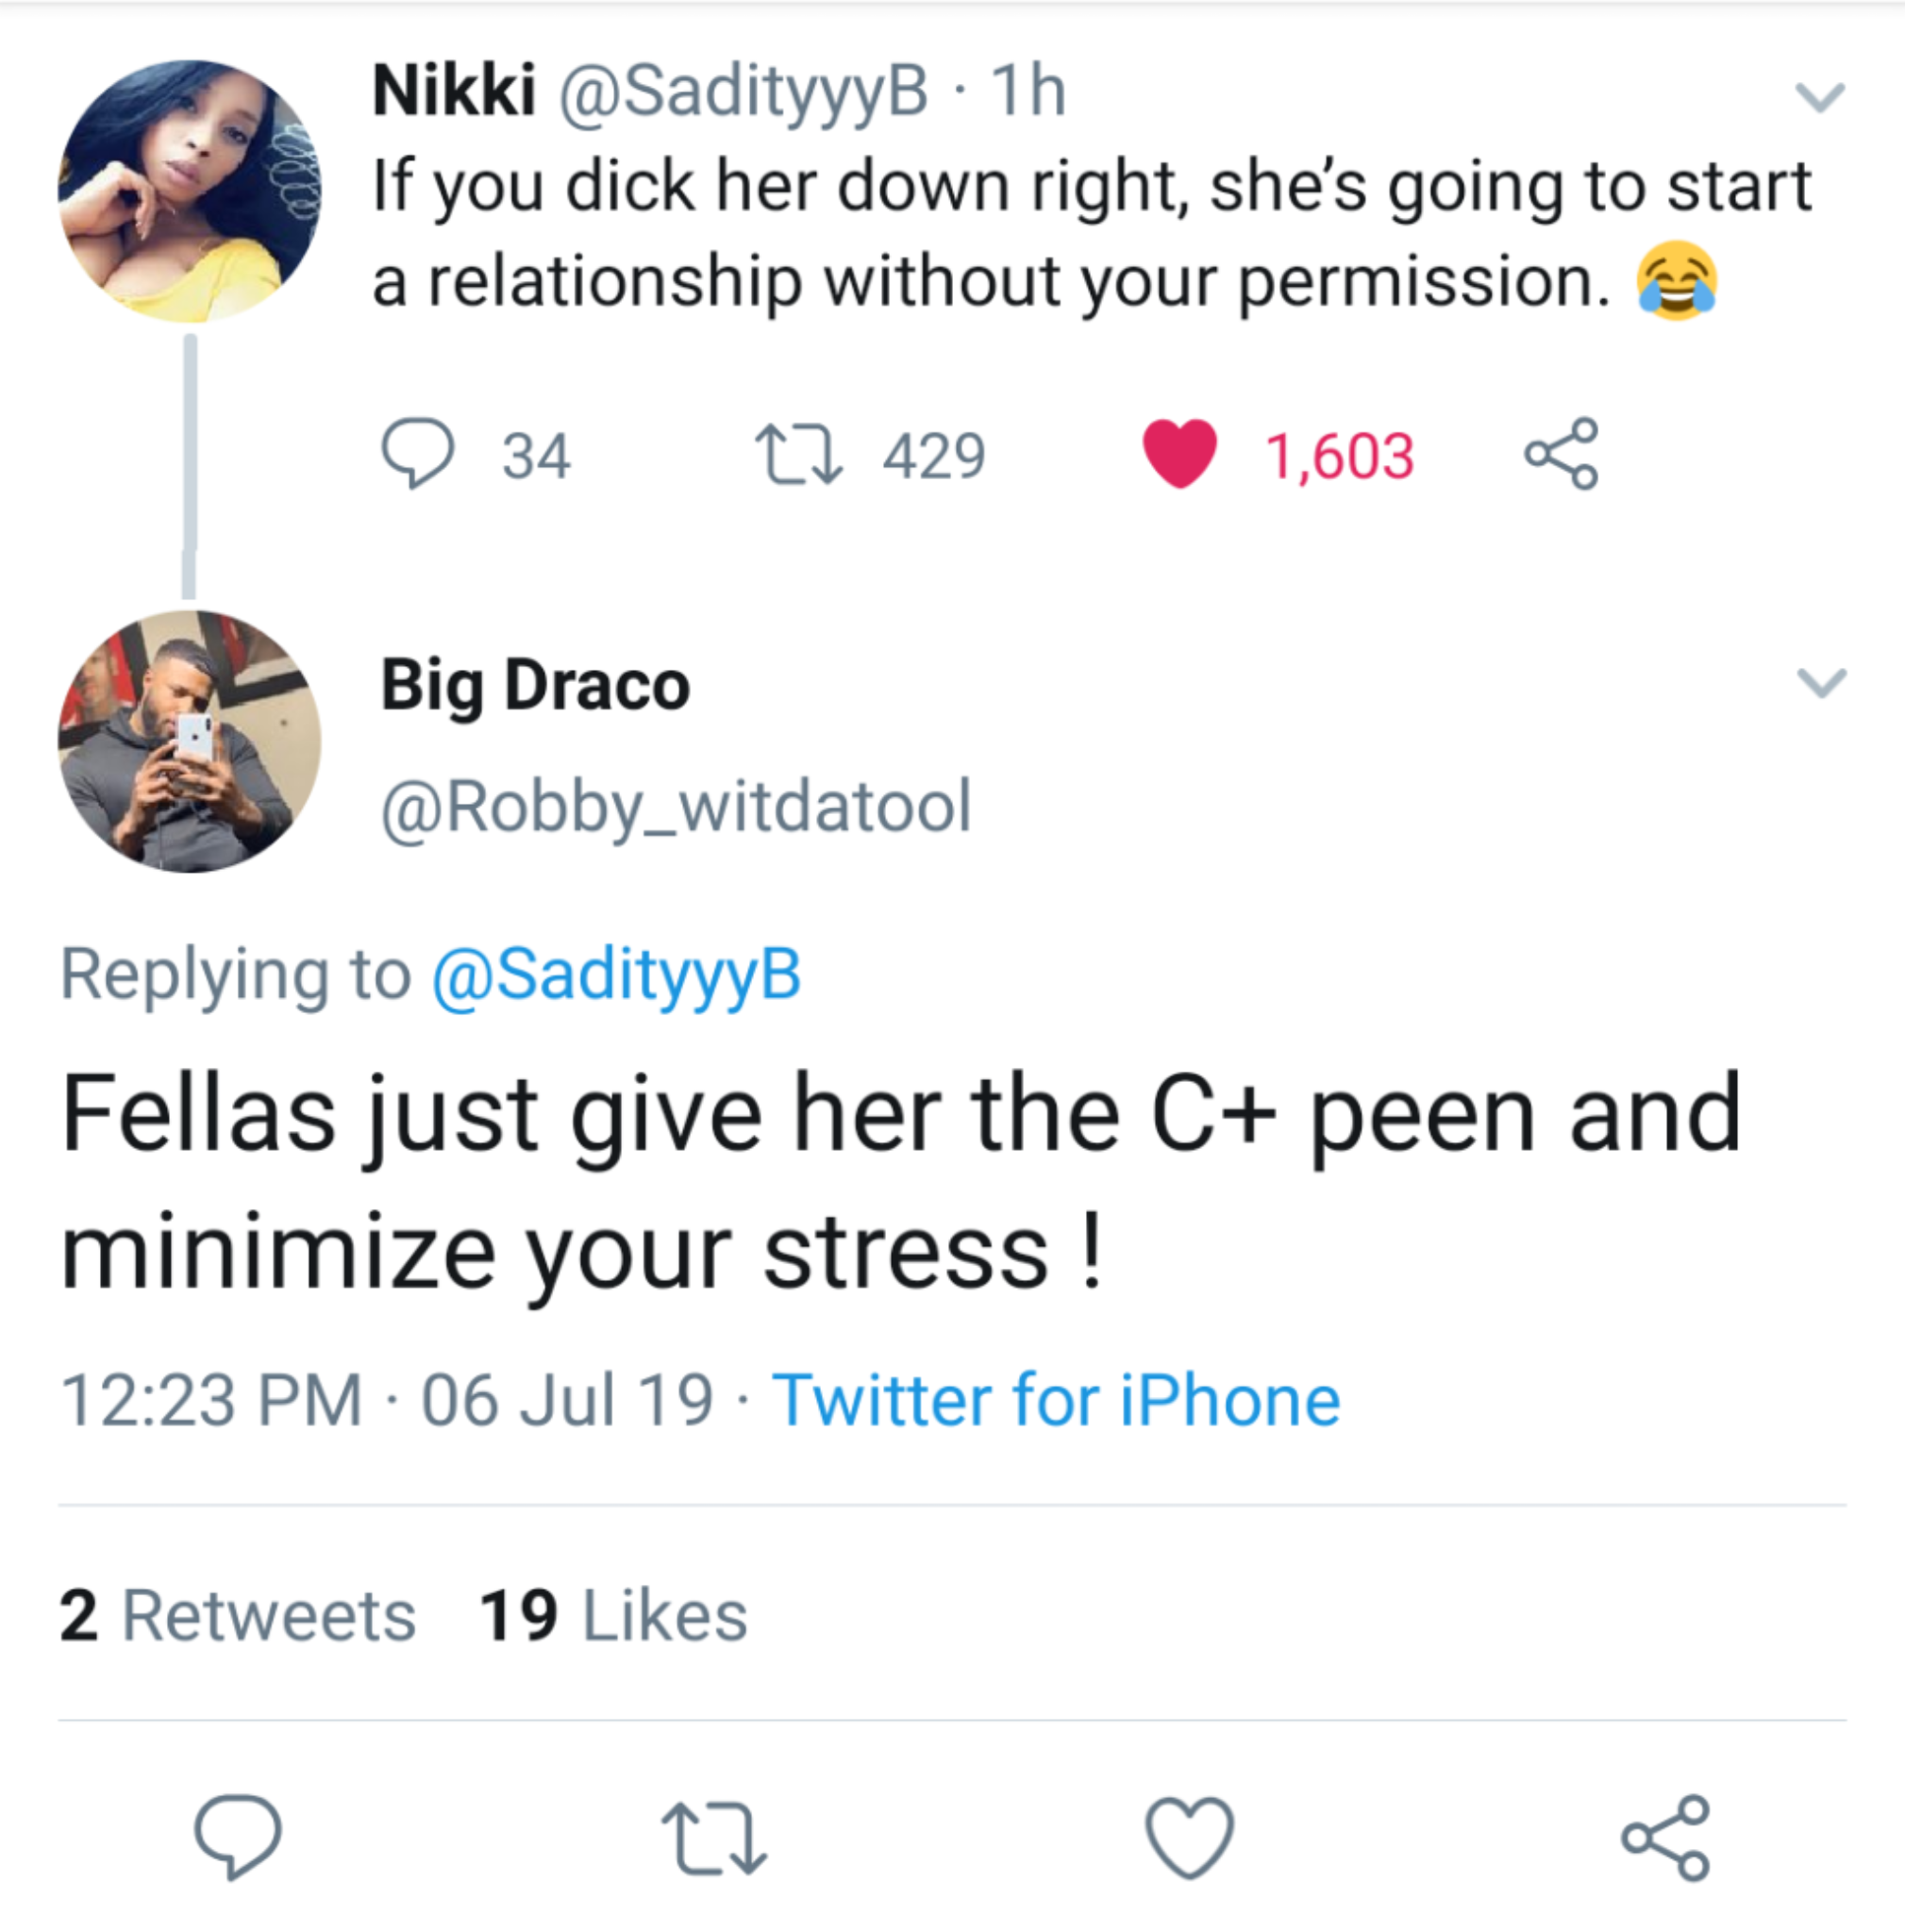 black twitter - If you dick her down right, she's going to start a relationship without your permission. 34 12 429 1,603 Big Draco Fellas just give her the C peen and minimize your stress!